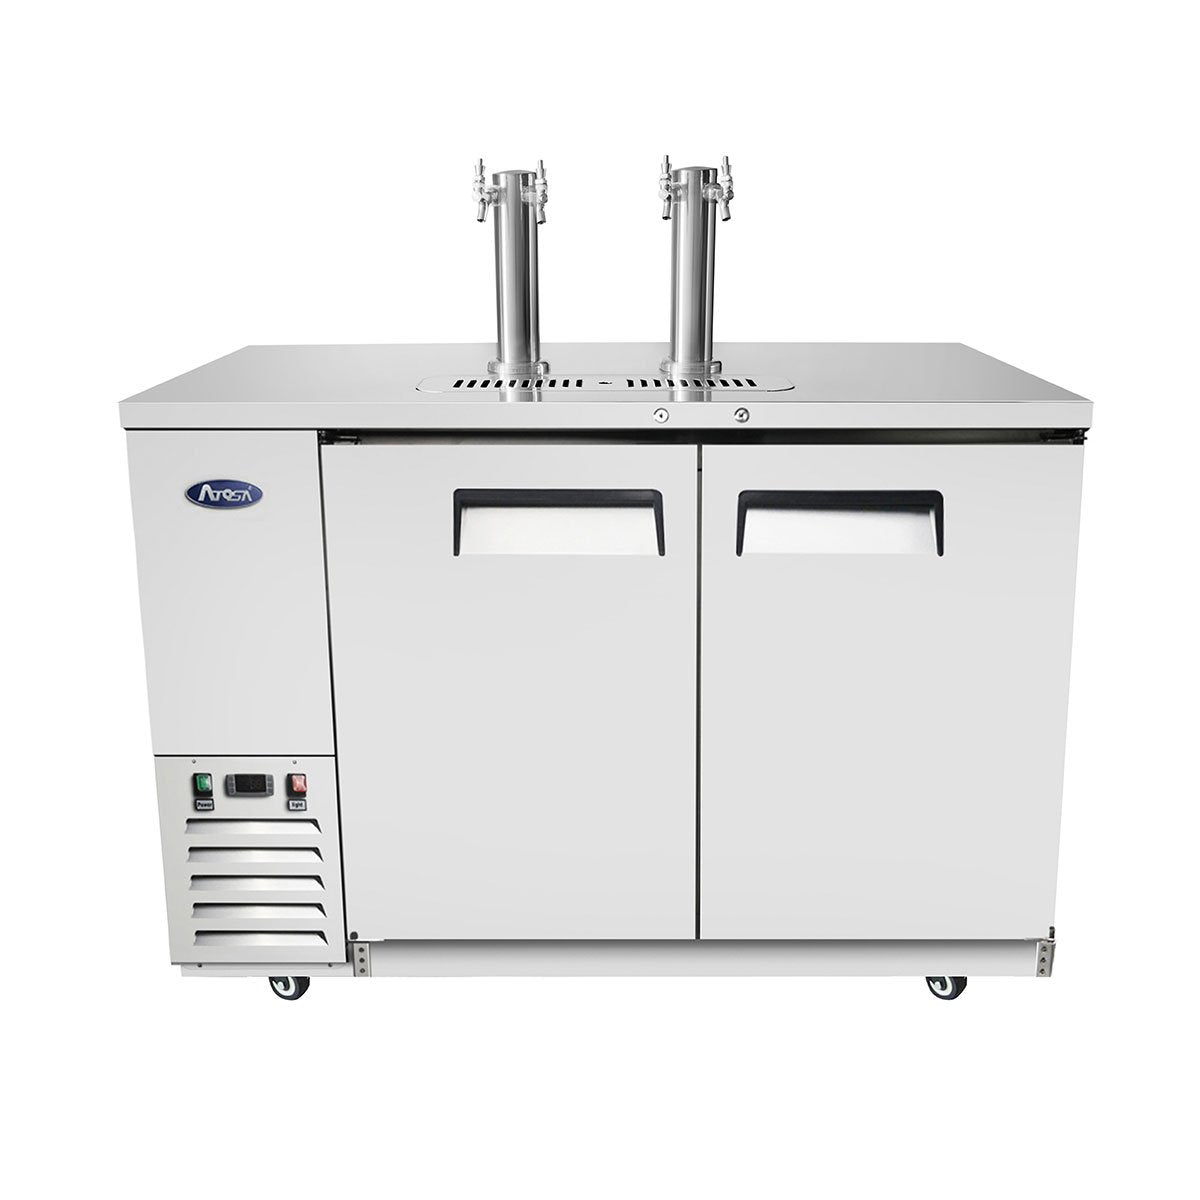 Atosa MKC58GR 58" Keg Cooler -Stainless Steel-with Dual Faucet Tower